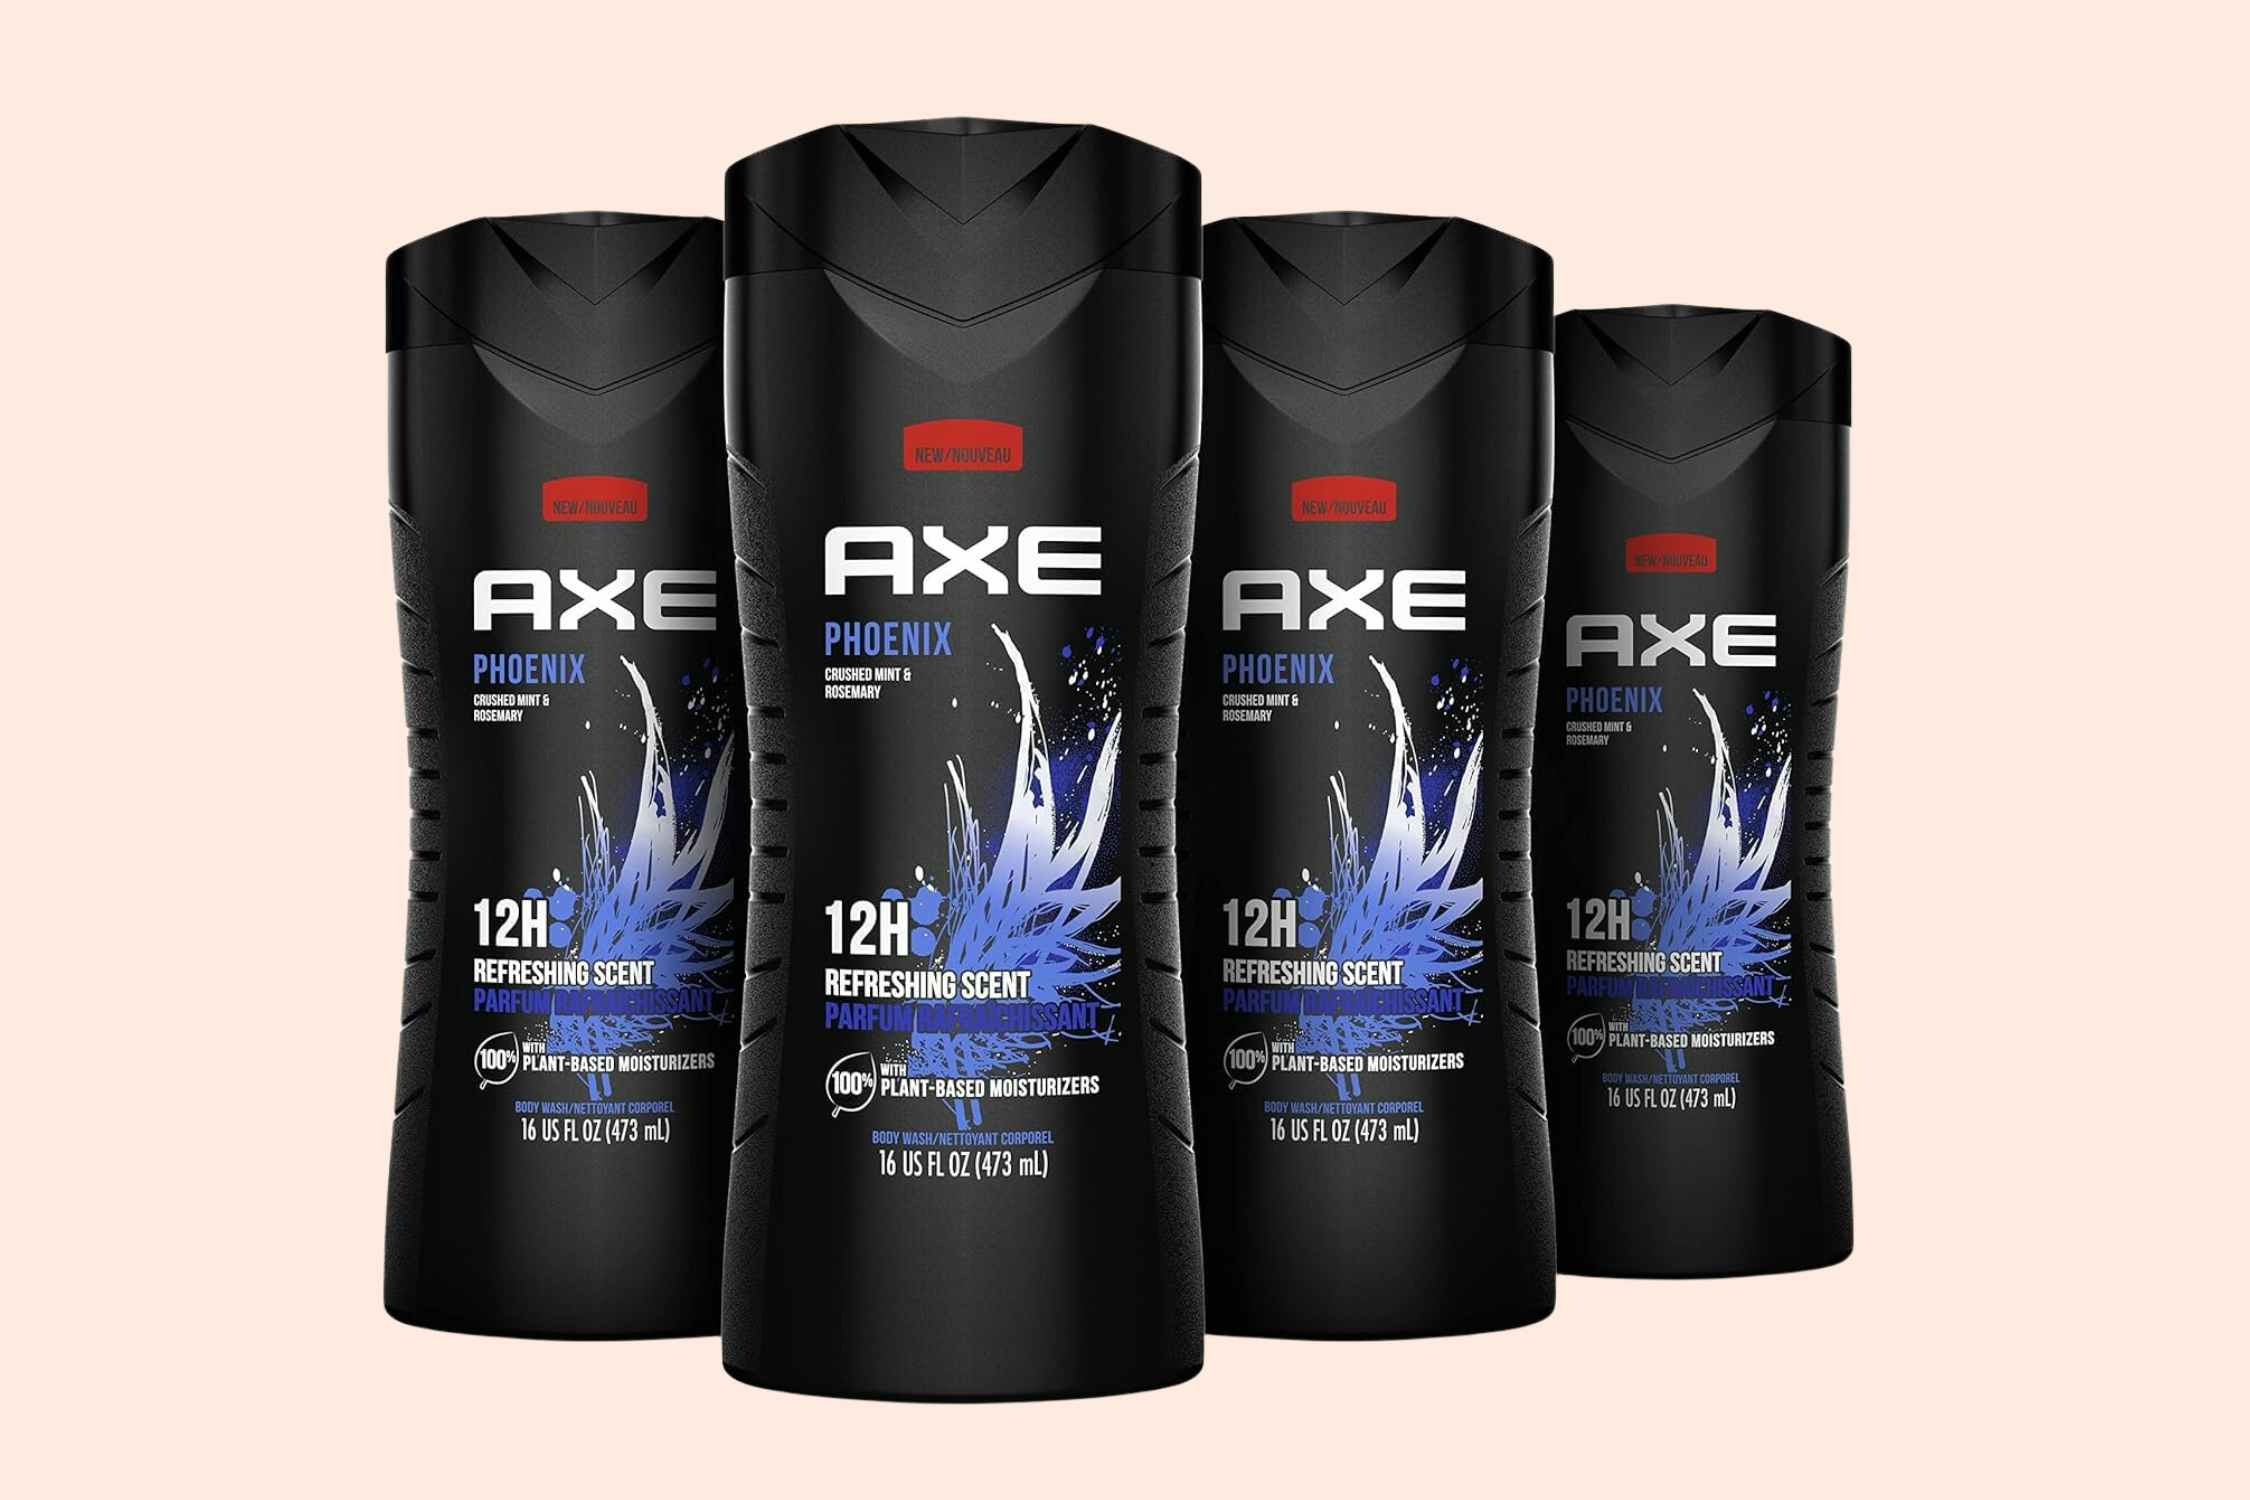 Axe Body Wash: Get 4 Bottles for as Low as $8.39 on Amazon